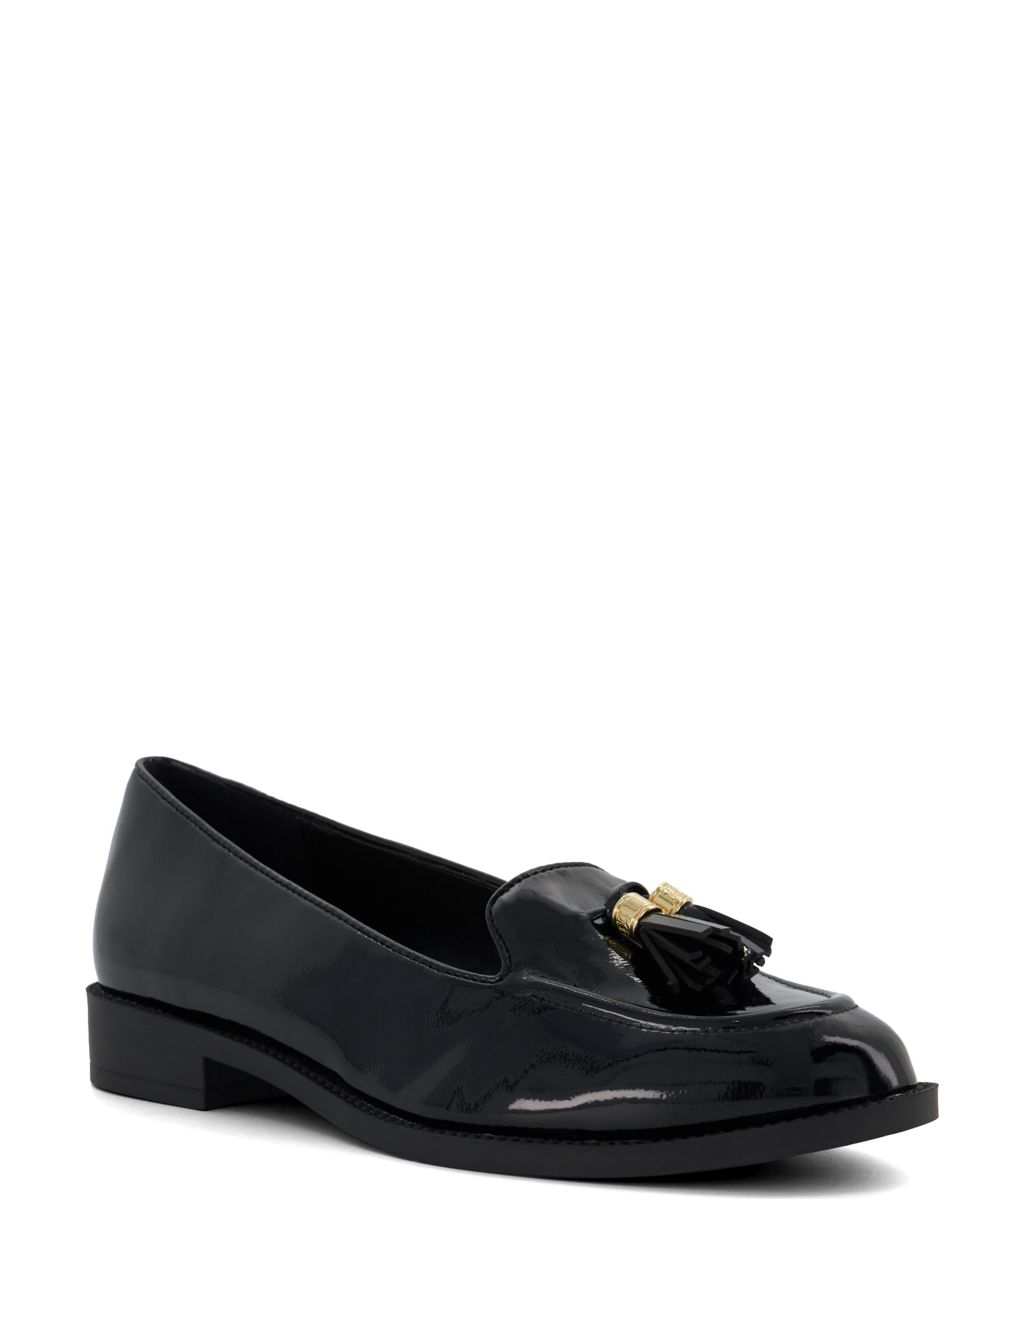 Wide Fit Patent Tassel Flat Loafers image 2